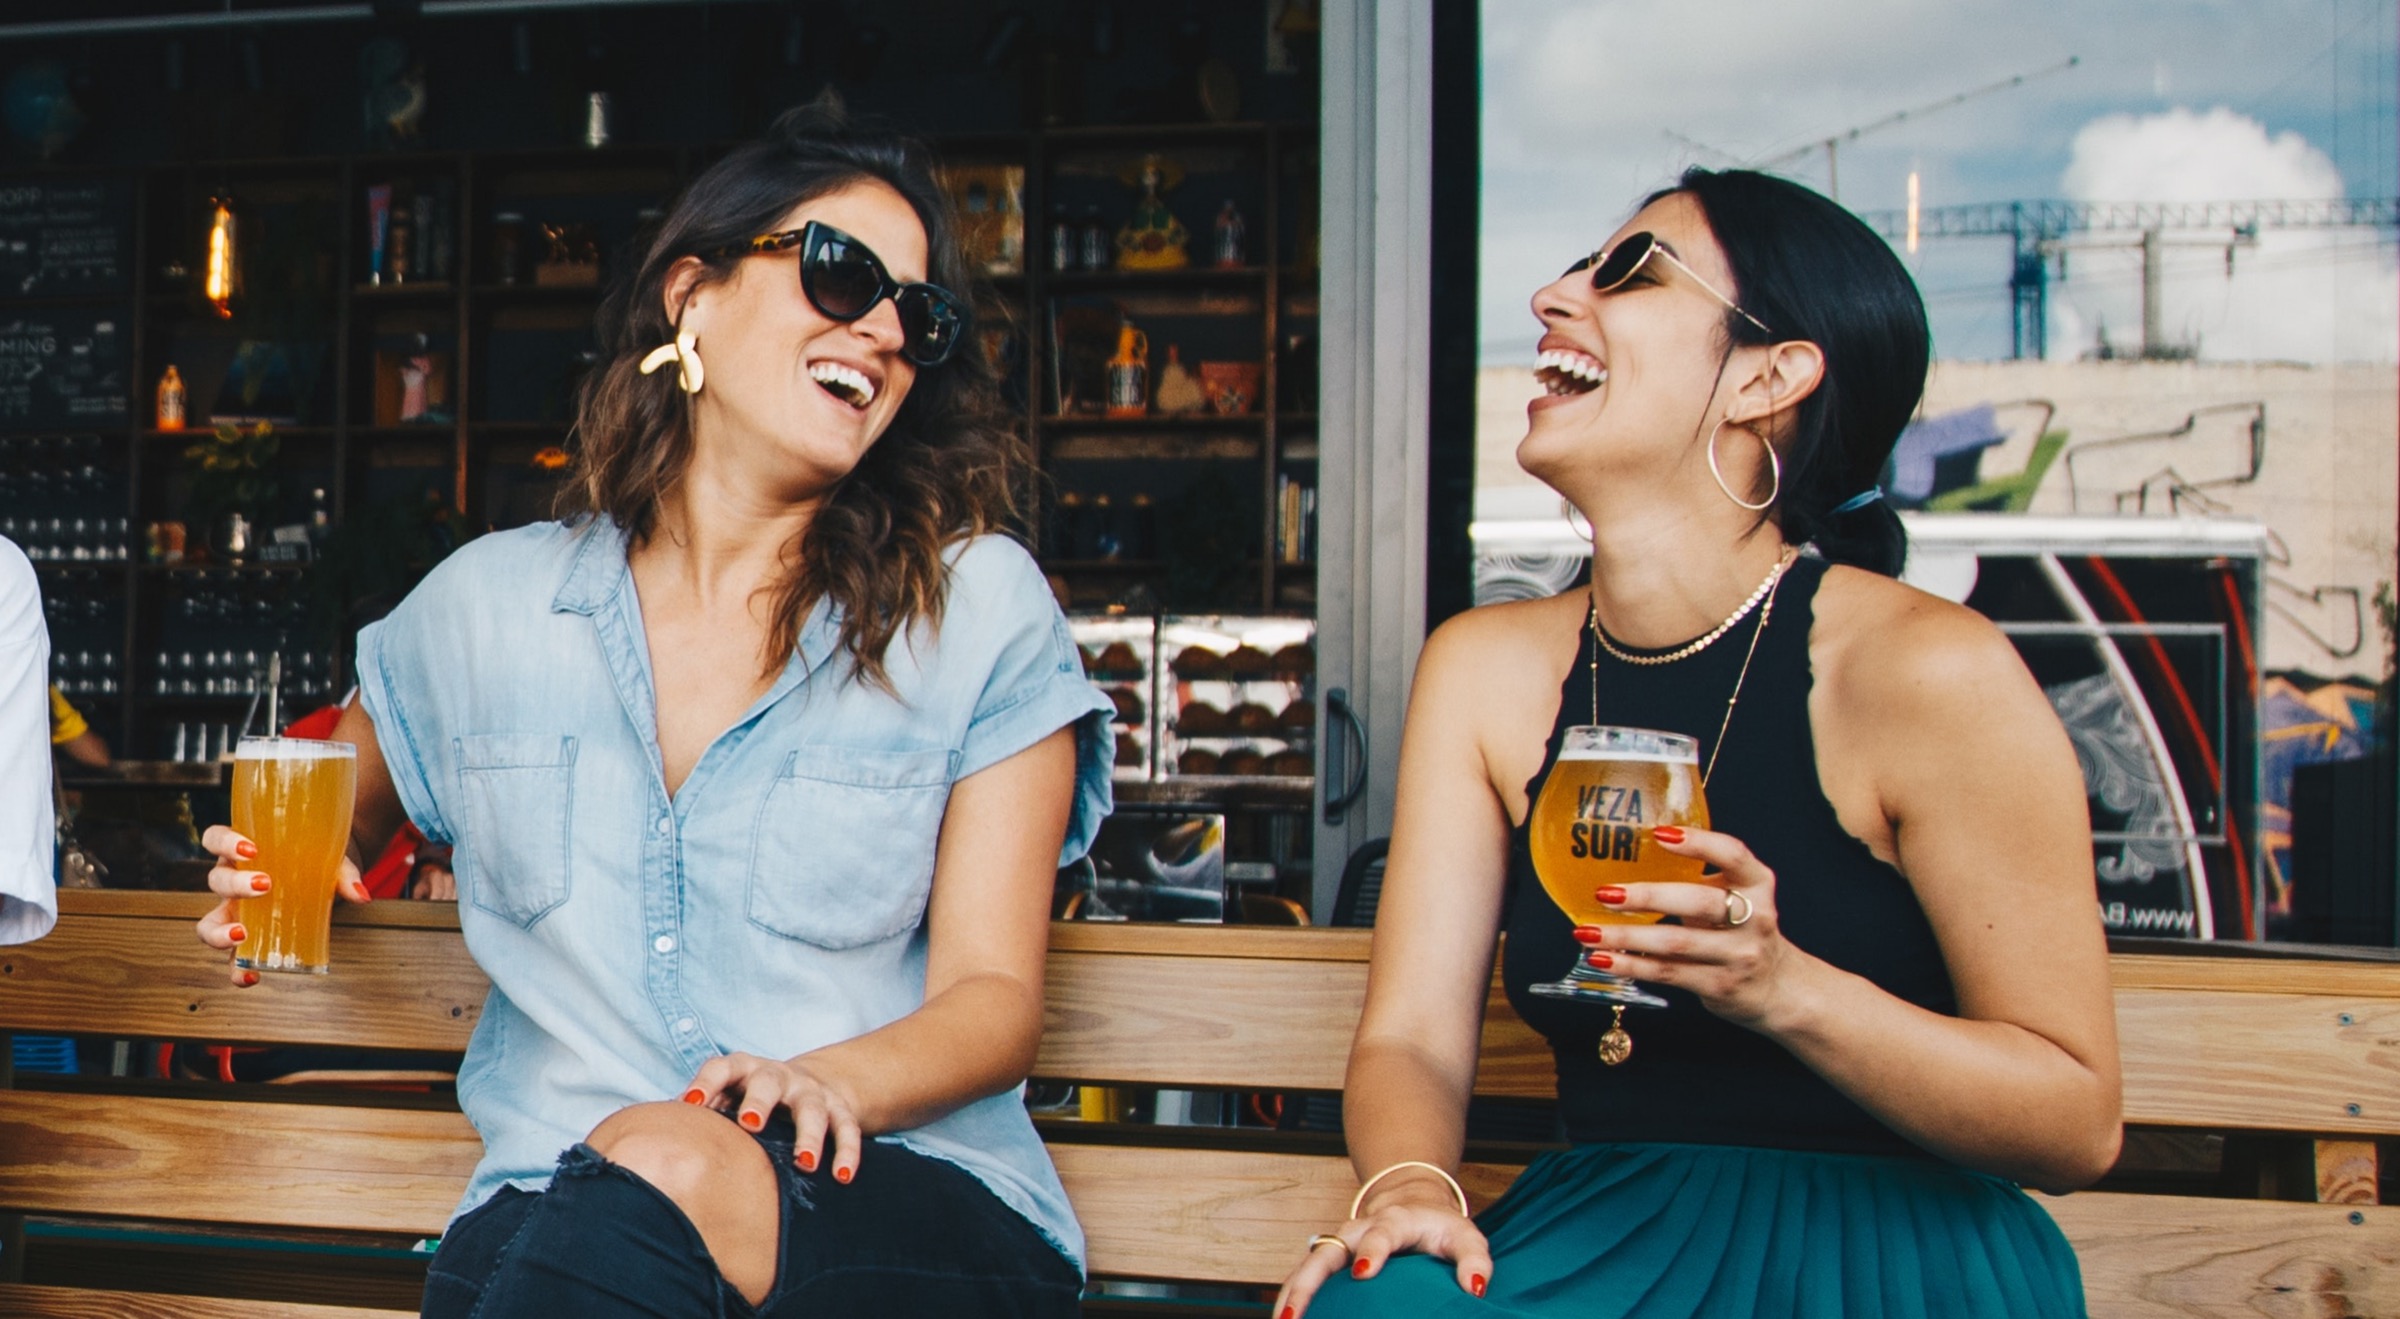 Two women drinking beer on a bench together